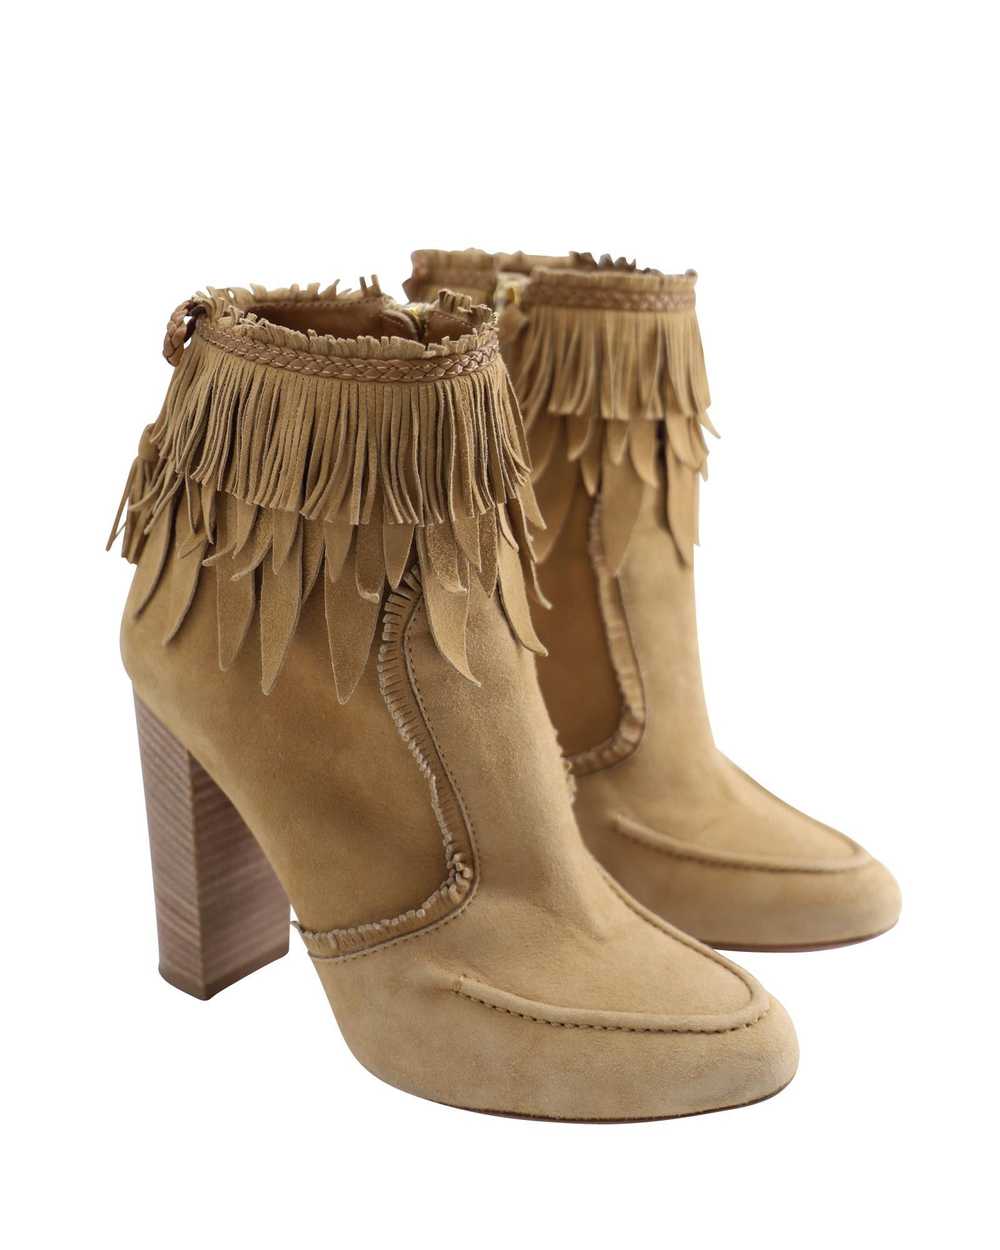 Aquazzura Fringed Beige Suede Ankle Boots with Bl… - image 5